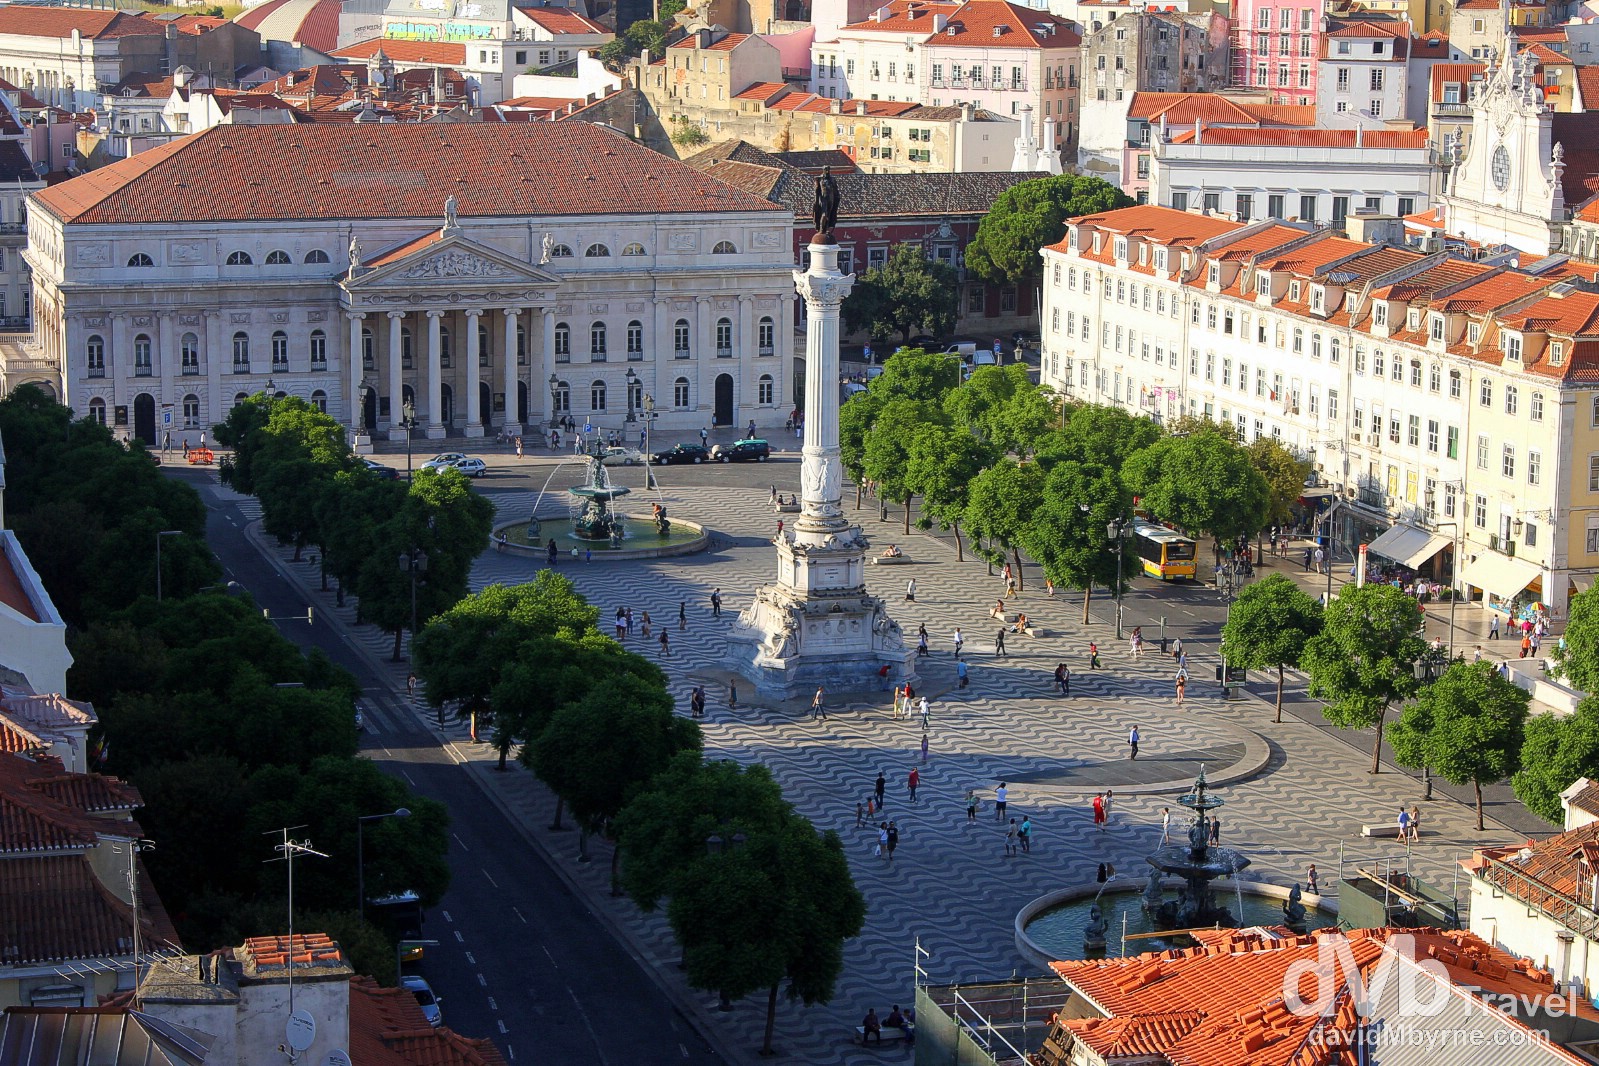 Praça de D. Pedro IV (Rossio Square) as seen from atop the Santa Justa Lift, Lisbon, Portugal. August 26th 2013.